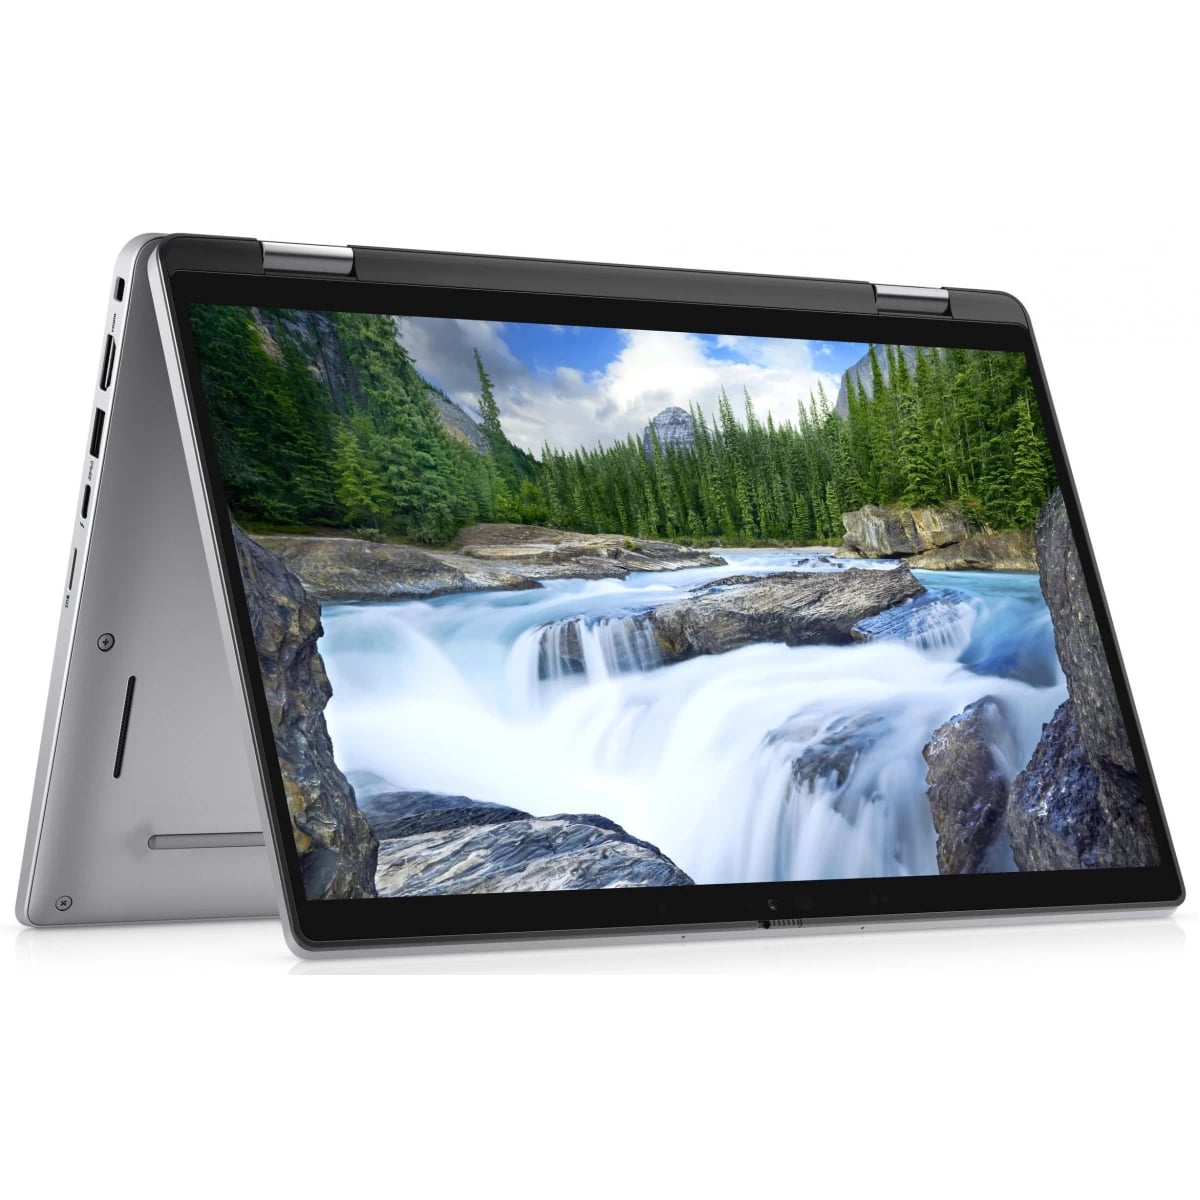 HDell Latitude 7320 11th Gen Core i7 up to 4.7GHz 4-Cores 12M Cash